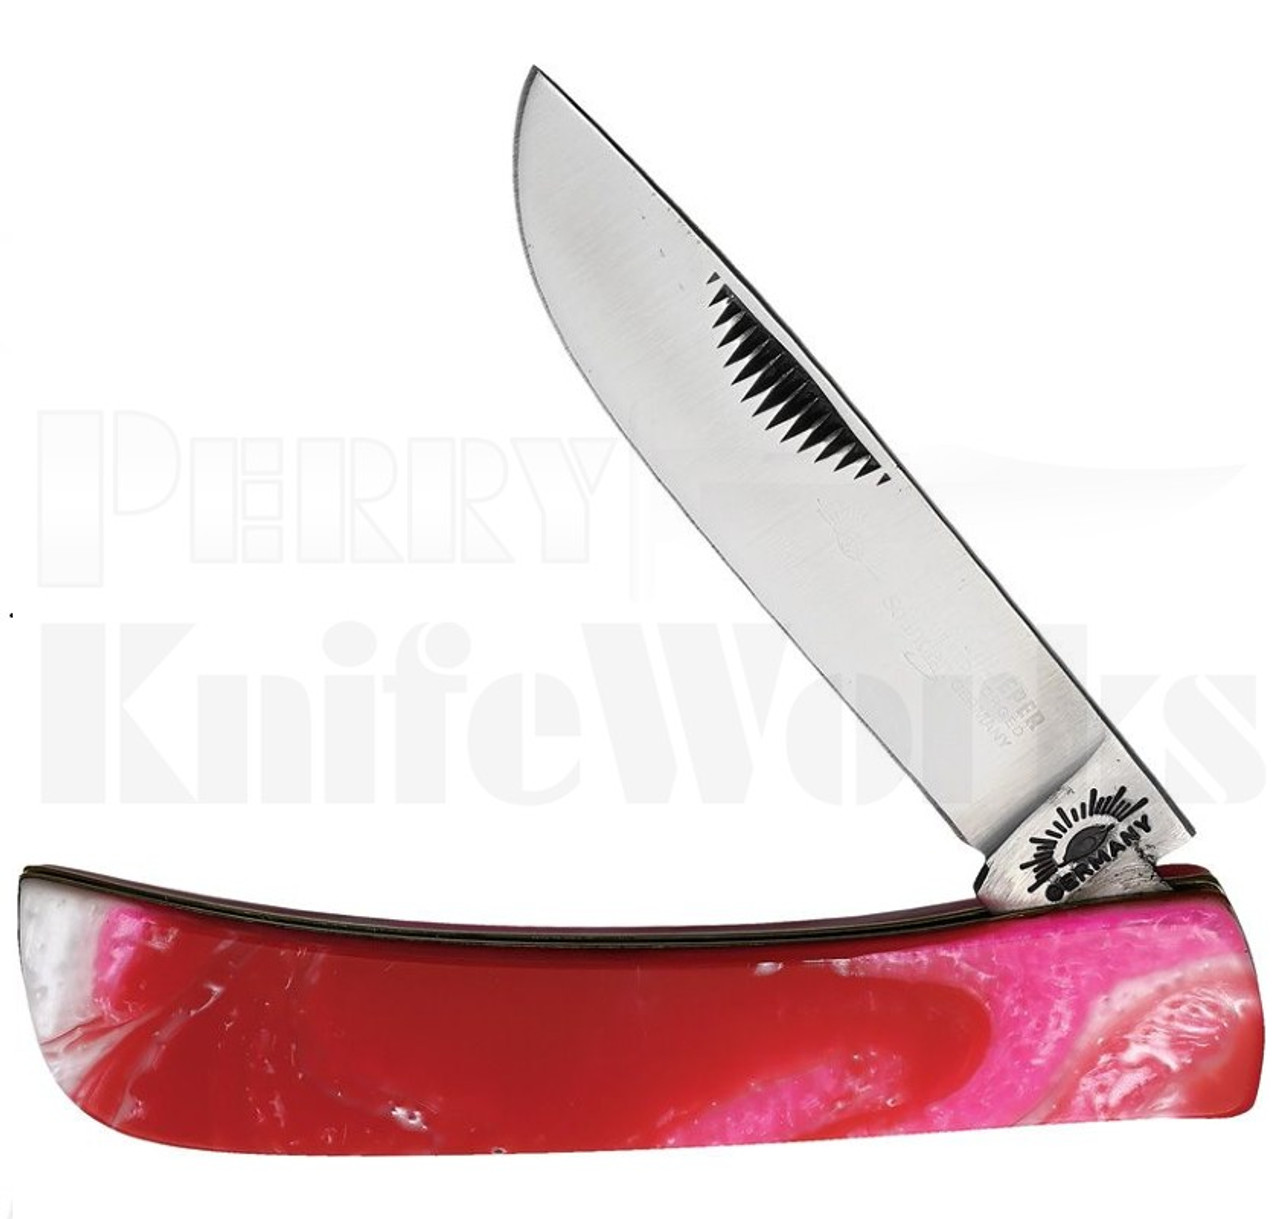 https://cdn11.bigcommerce.com/s-ar8byh/images/stencil/1280x1280/products/12537/43368/German-Eye-Brand-Limited-Clodbuster-Jr-Slip-Joint-Knife-Red-Wave__30889.1699482576.jpg?c=2